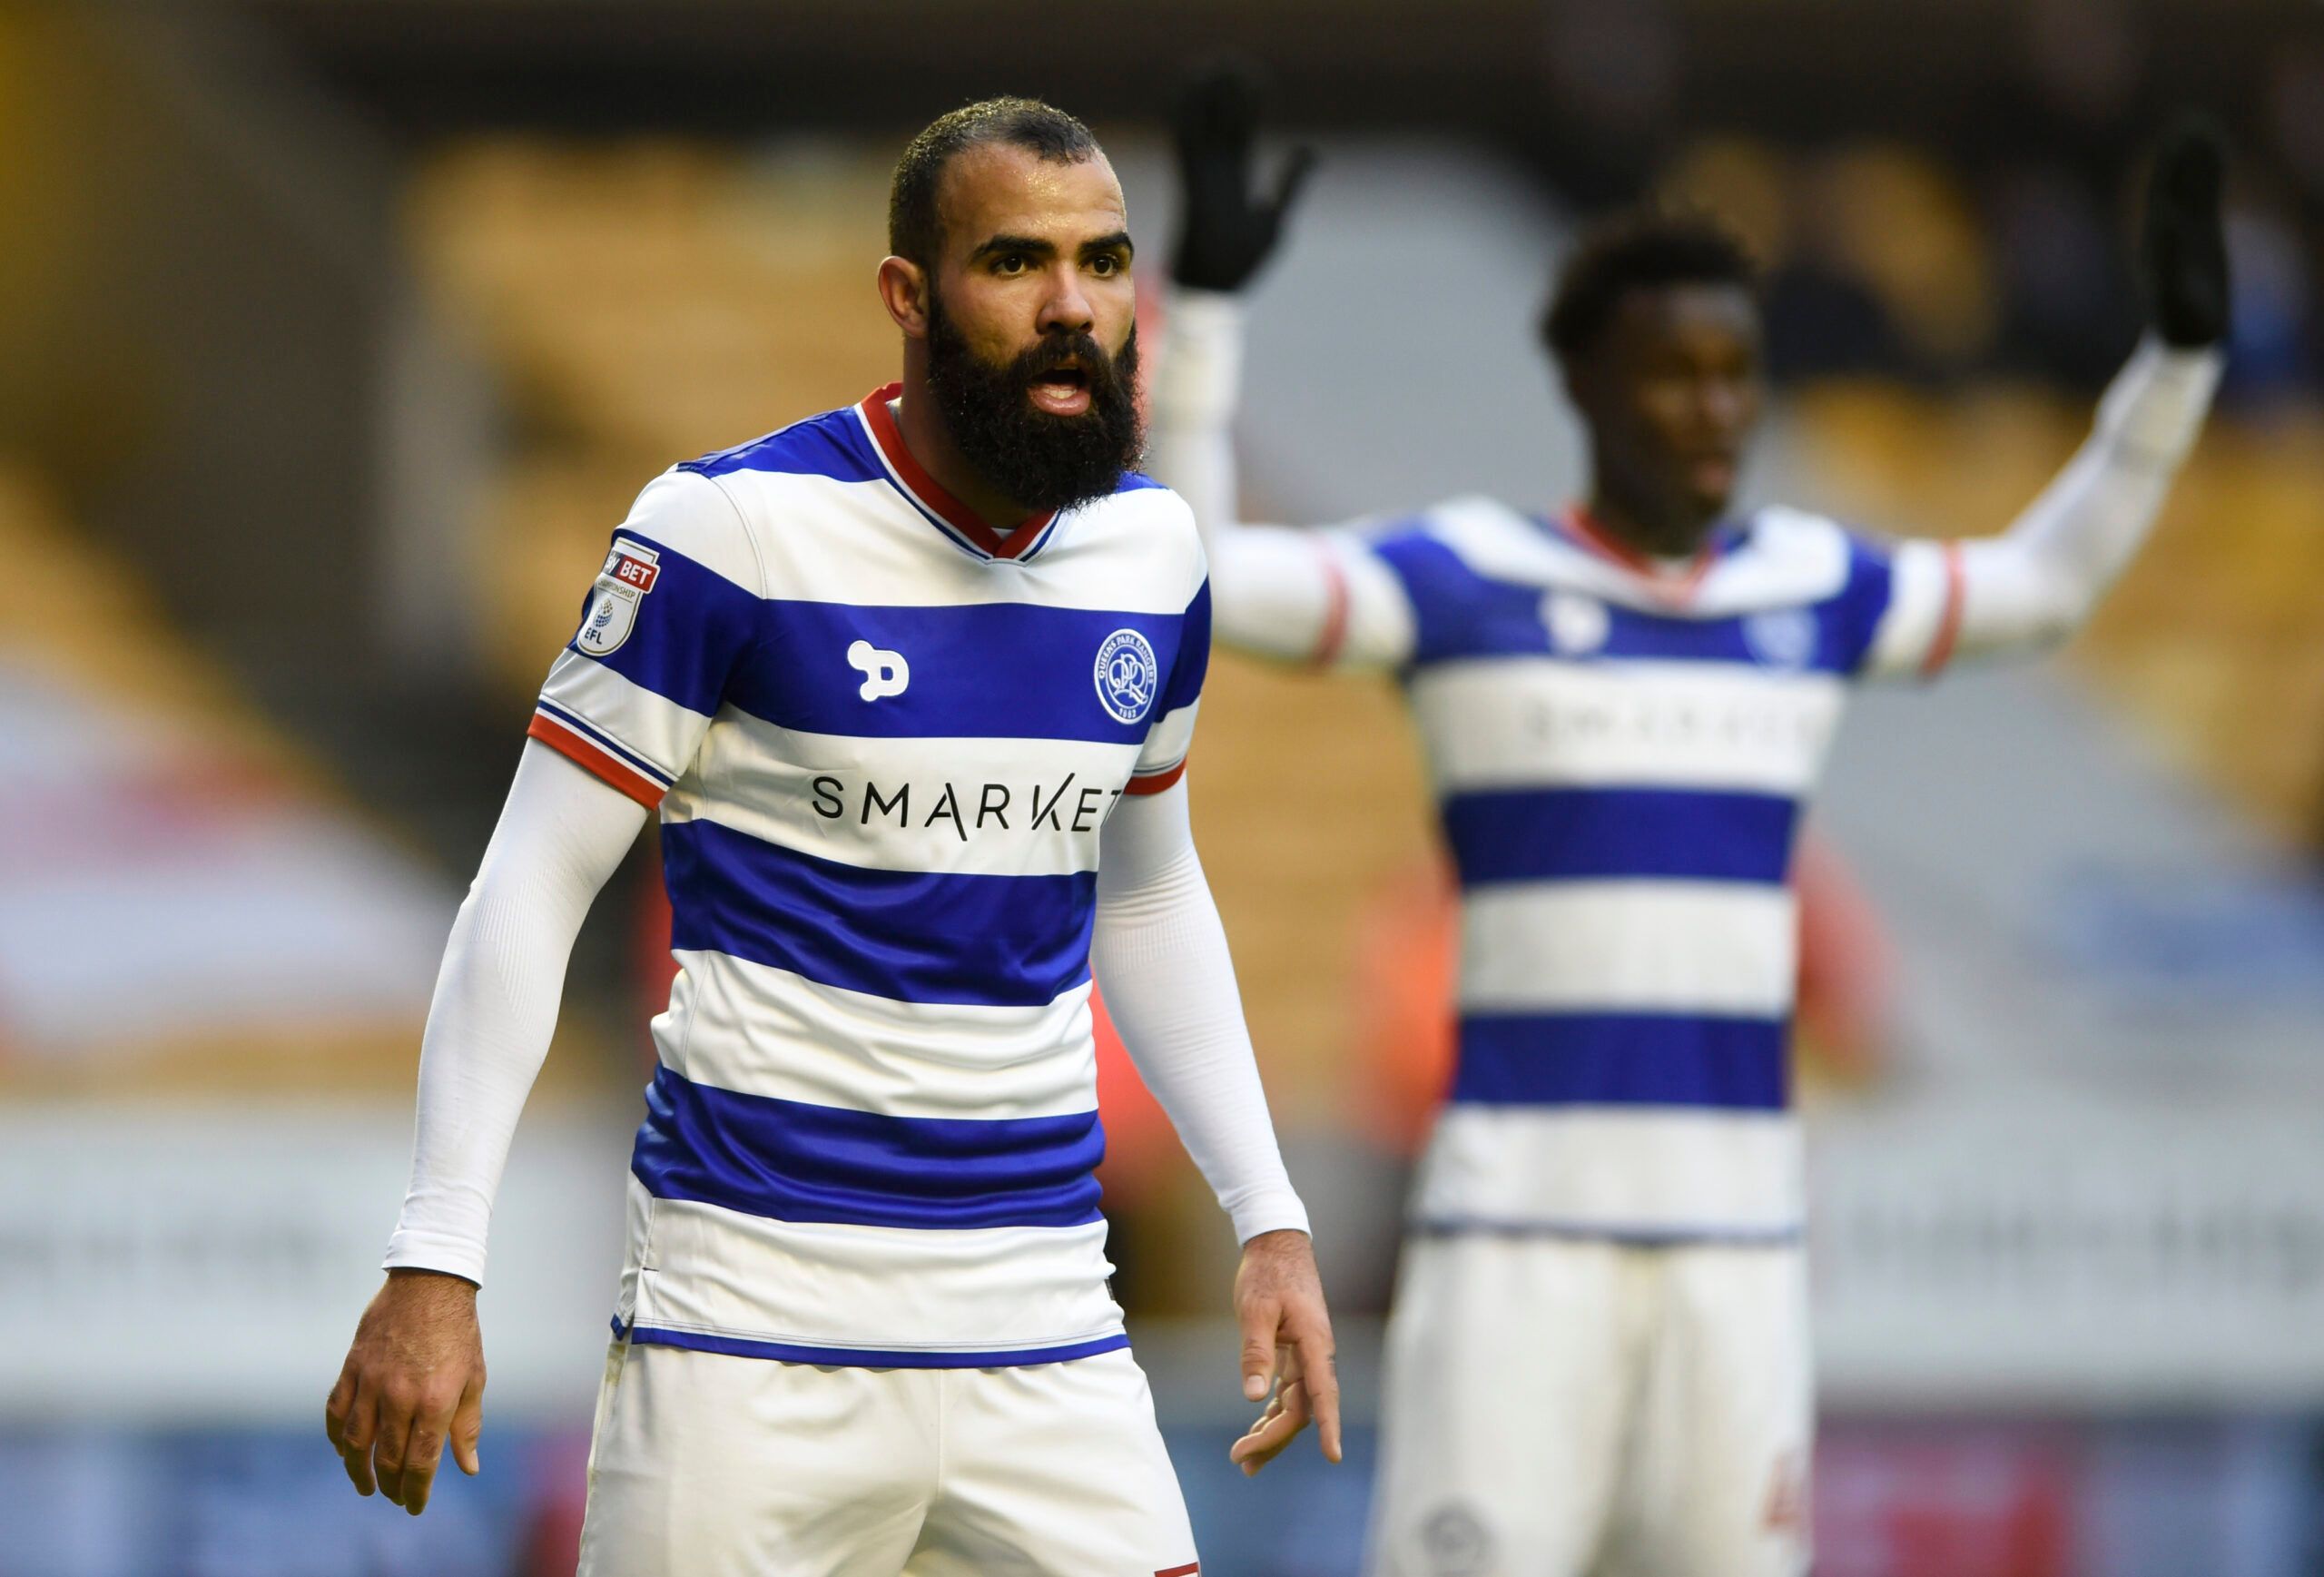 Britain Football Soccer - Wolverhampton Wanderers v Queens Park Rangers- Sky Bet Championship - Molineux -  16/17 - 31/12/16 QPR's Sandro Mandatory Credit: Action Images / Adam Holt EDITORIAL USE ONLY. No use with unauthorized audio, video, data, fixture lists, club/league logos or 